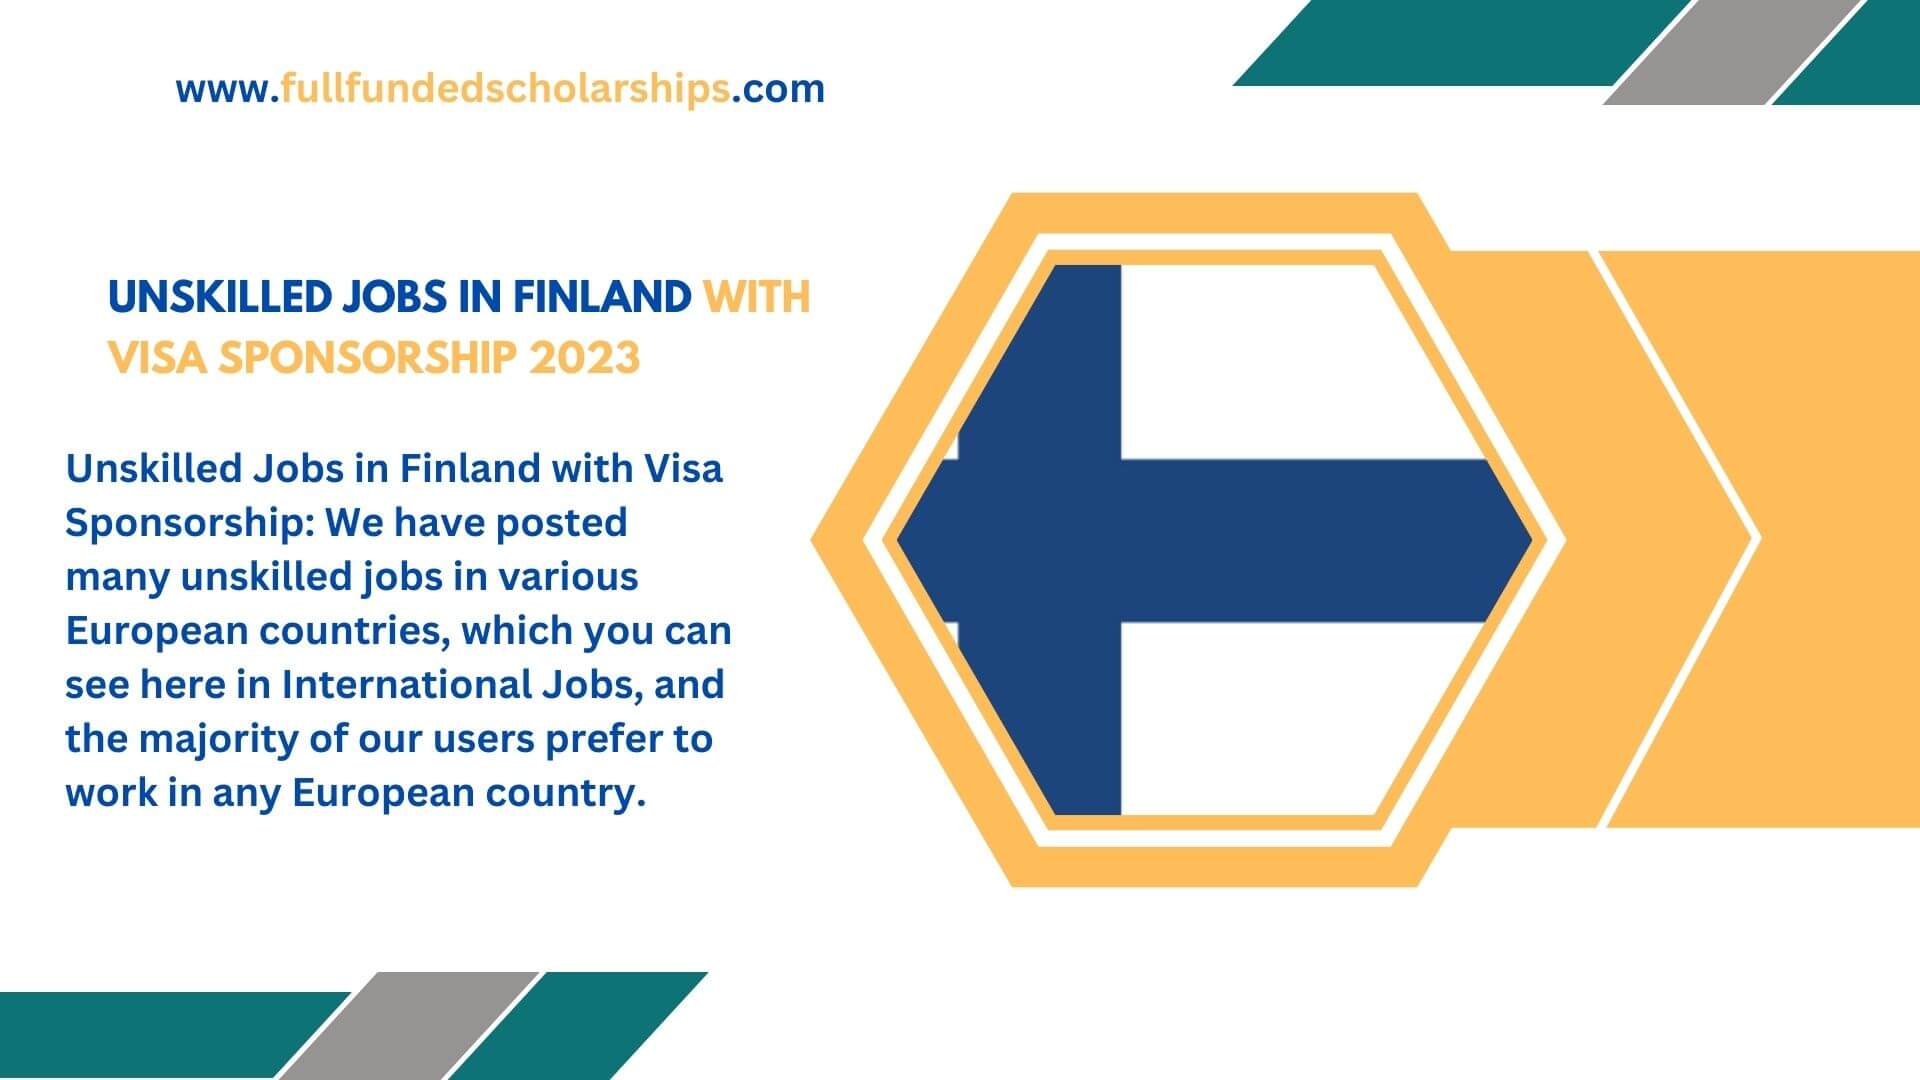 Unskilled Jobs in Finland with Visa Sponsorship 2023